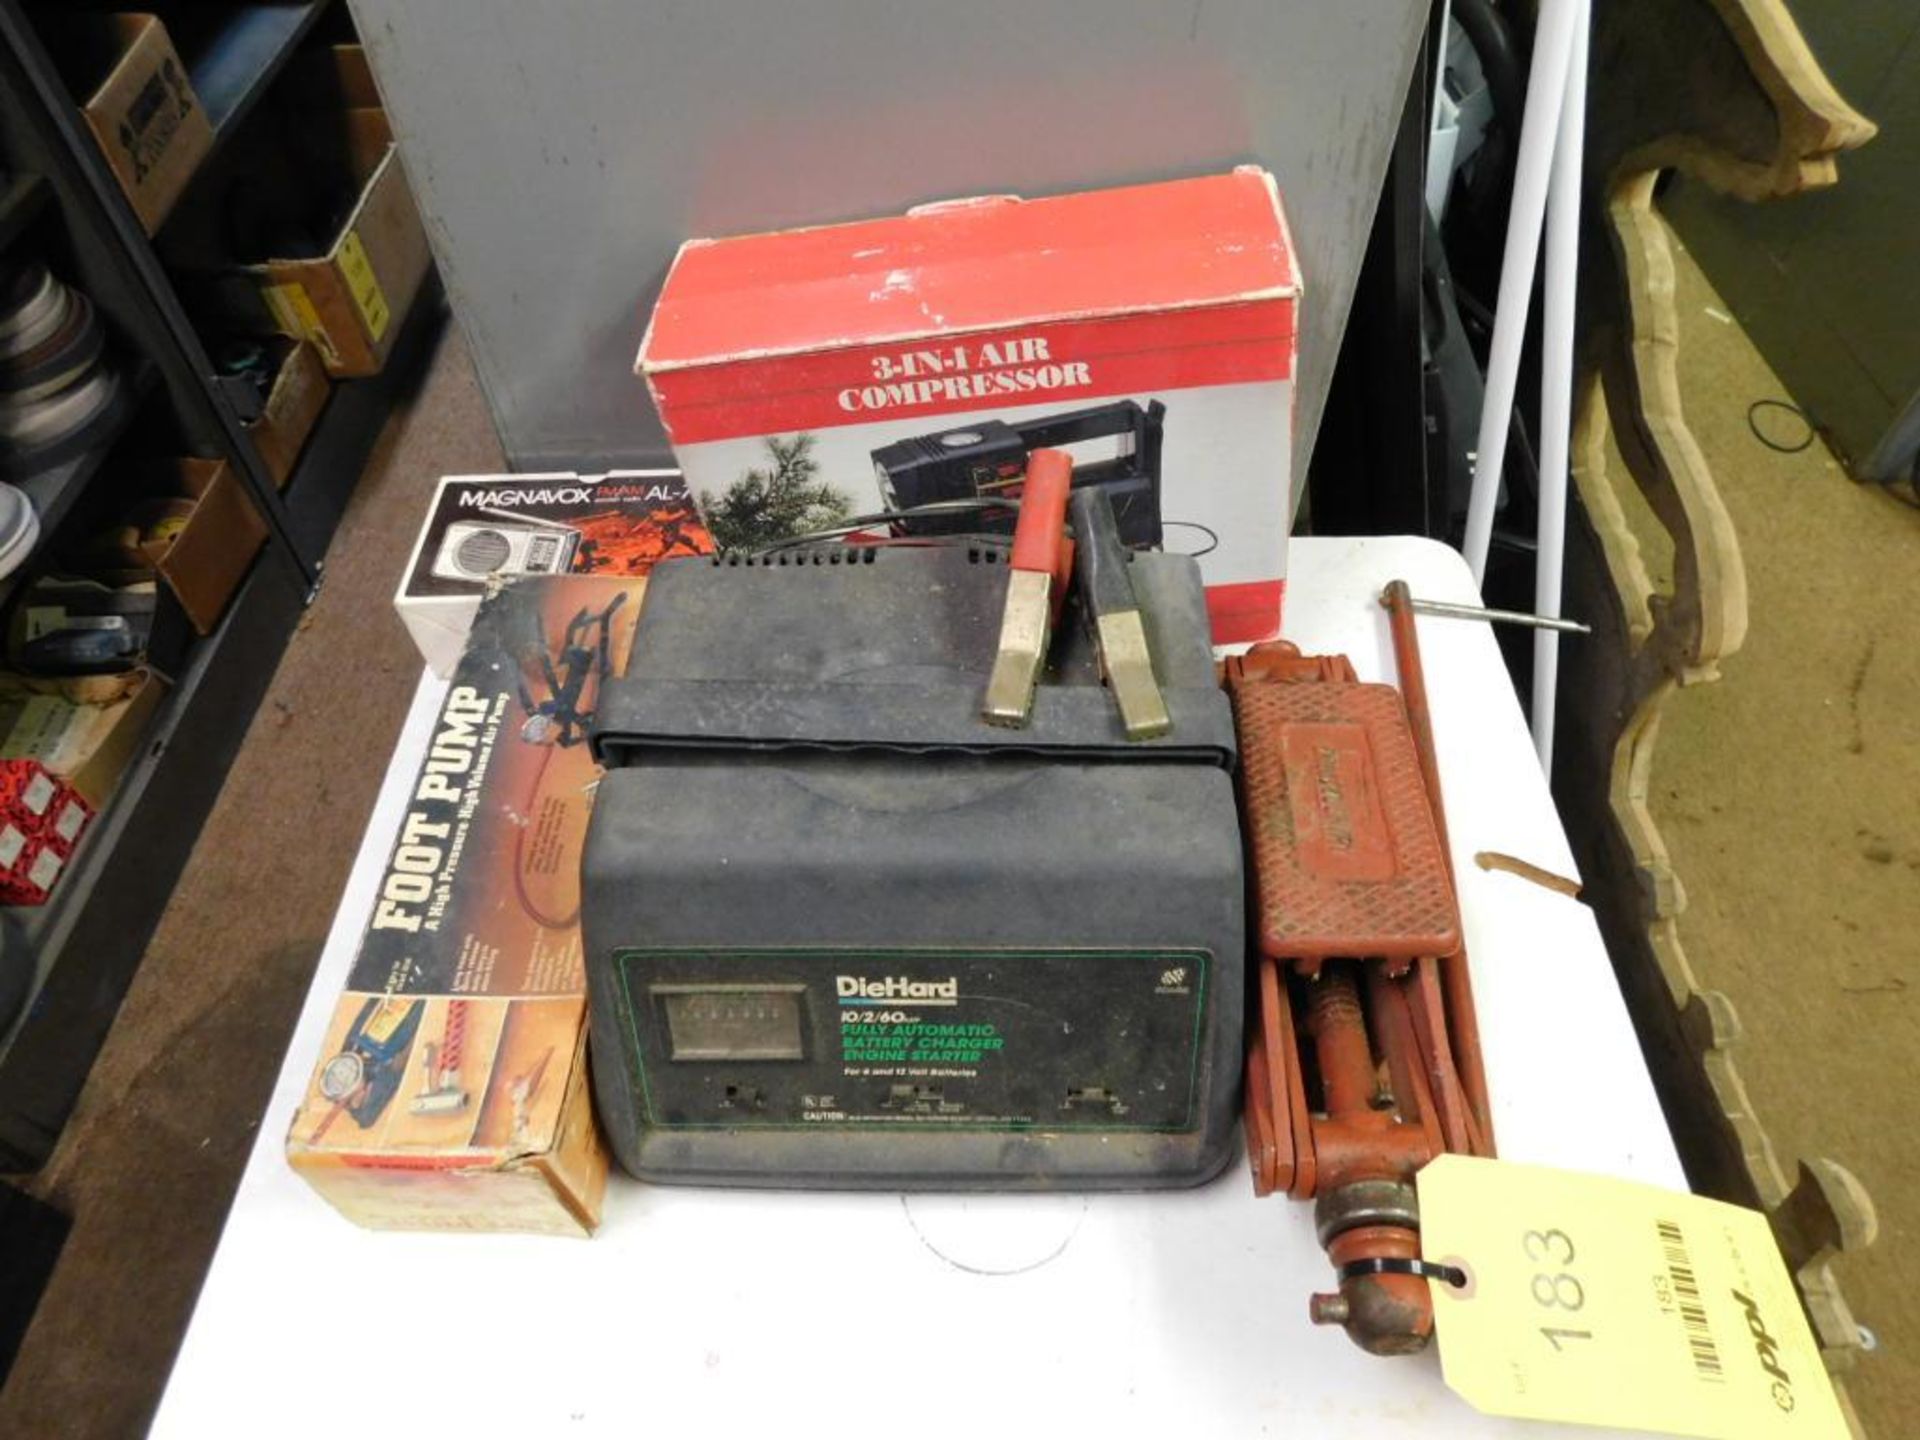 LOT: Cross Country Jack, Die Hard Battery Charger, 3 - in - 1 Air Compressor, Foot Pump, Pocket Radi